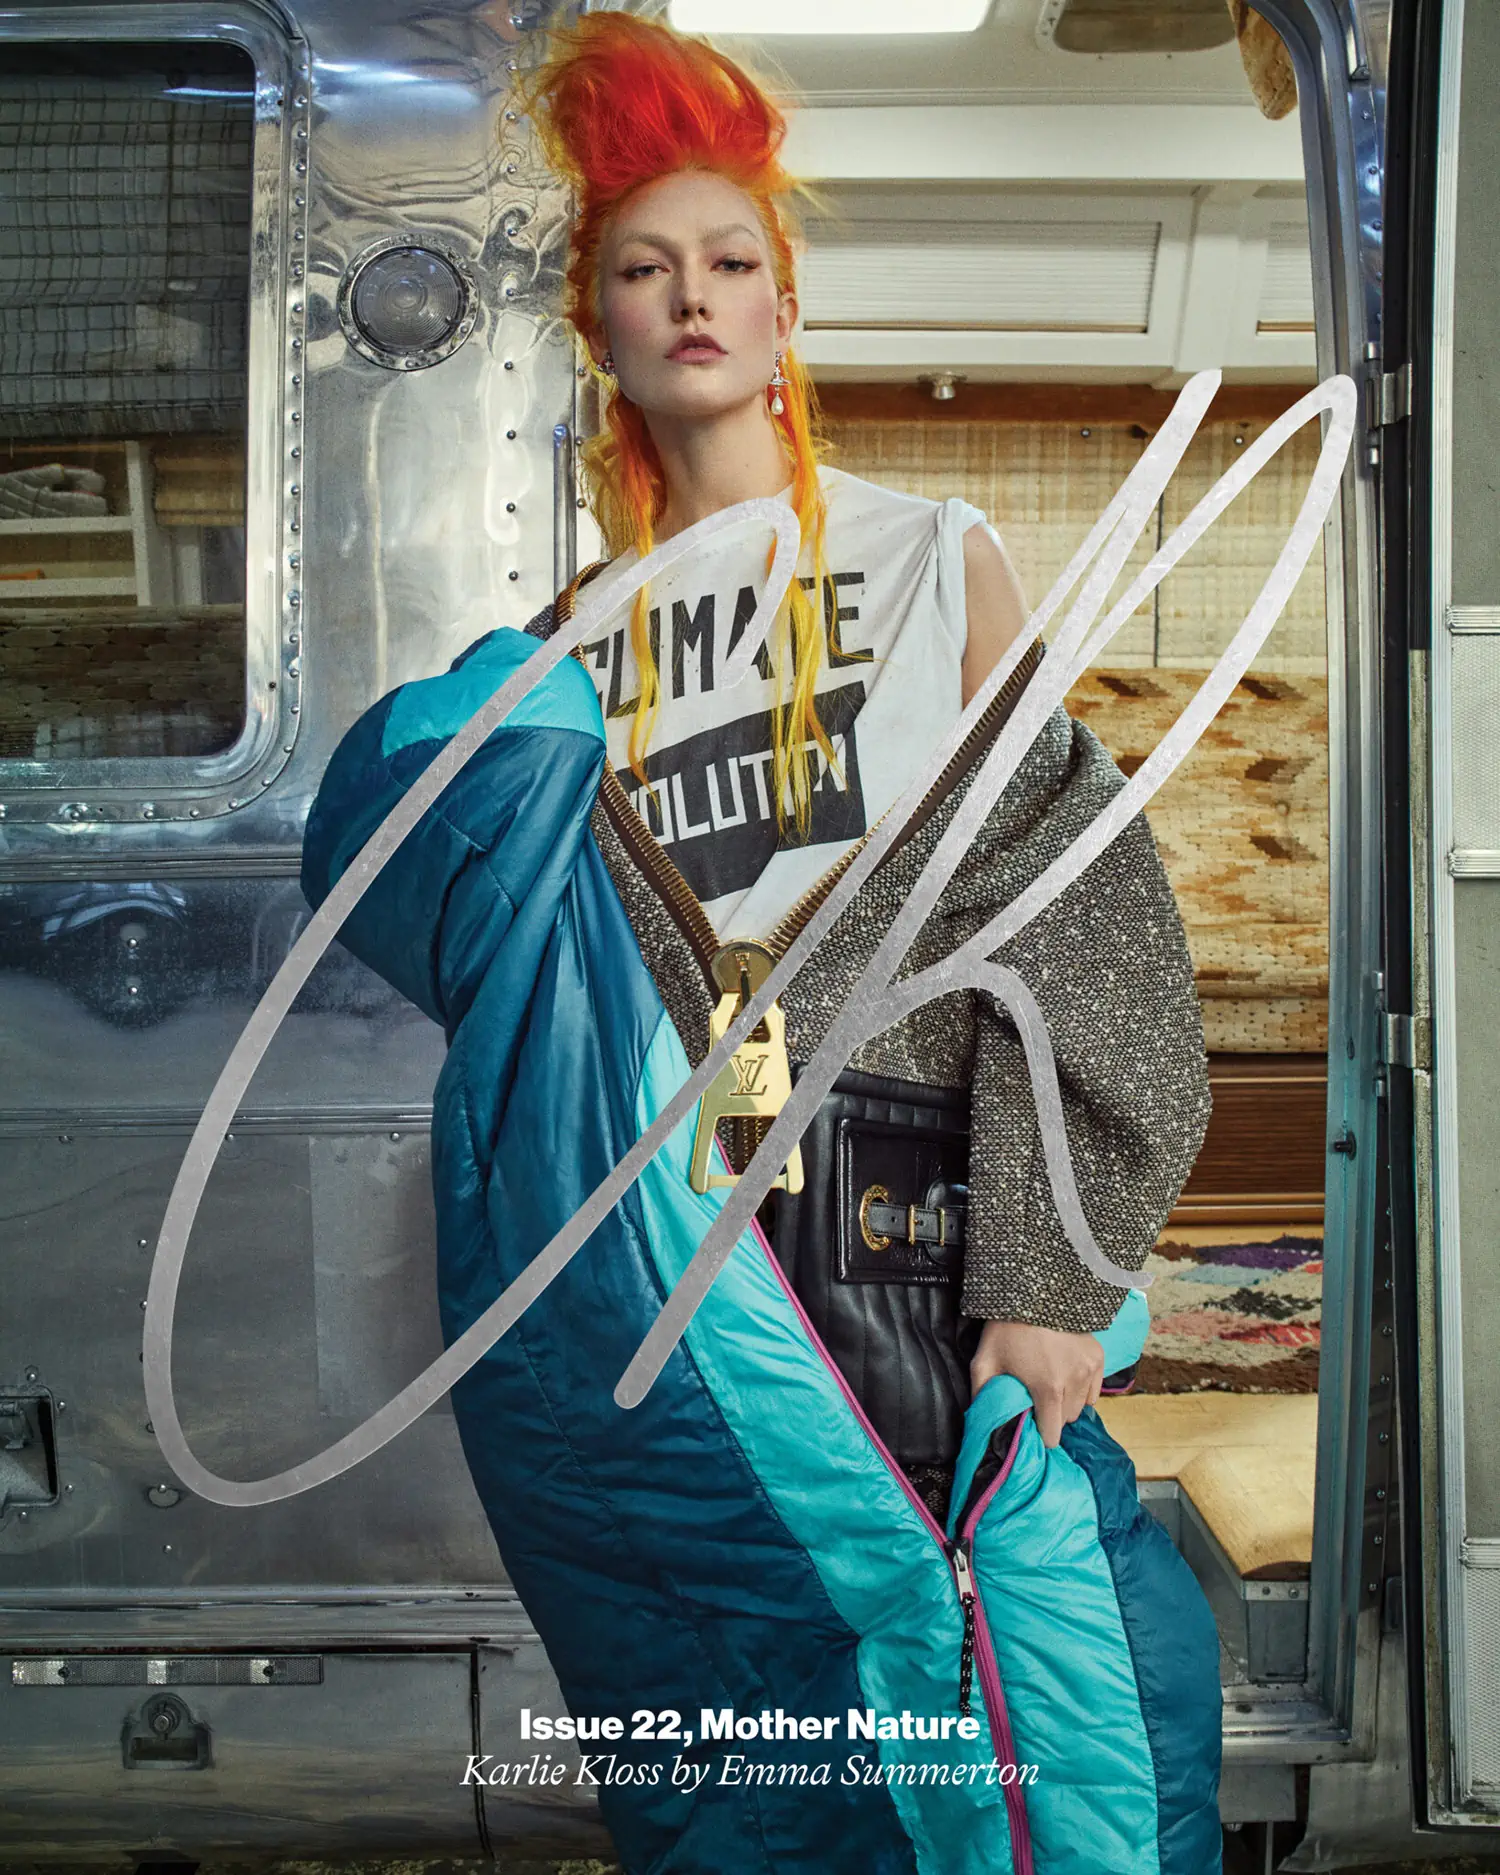 Karlie Kloss covers CR Fashion Book Issue 22 by Emma Summerton